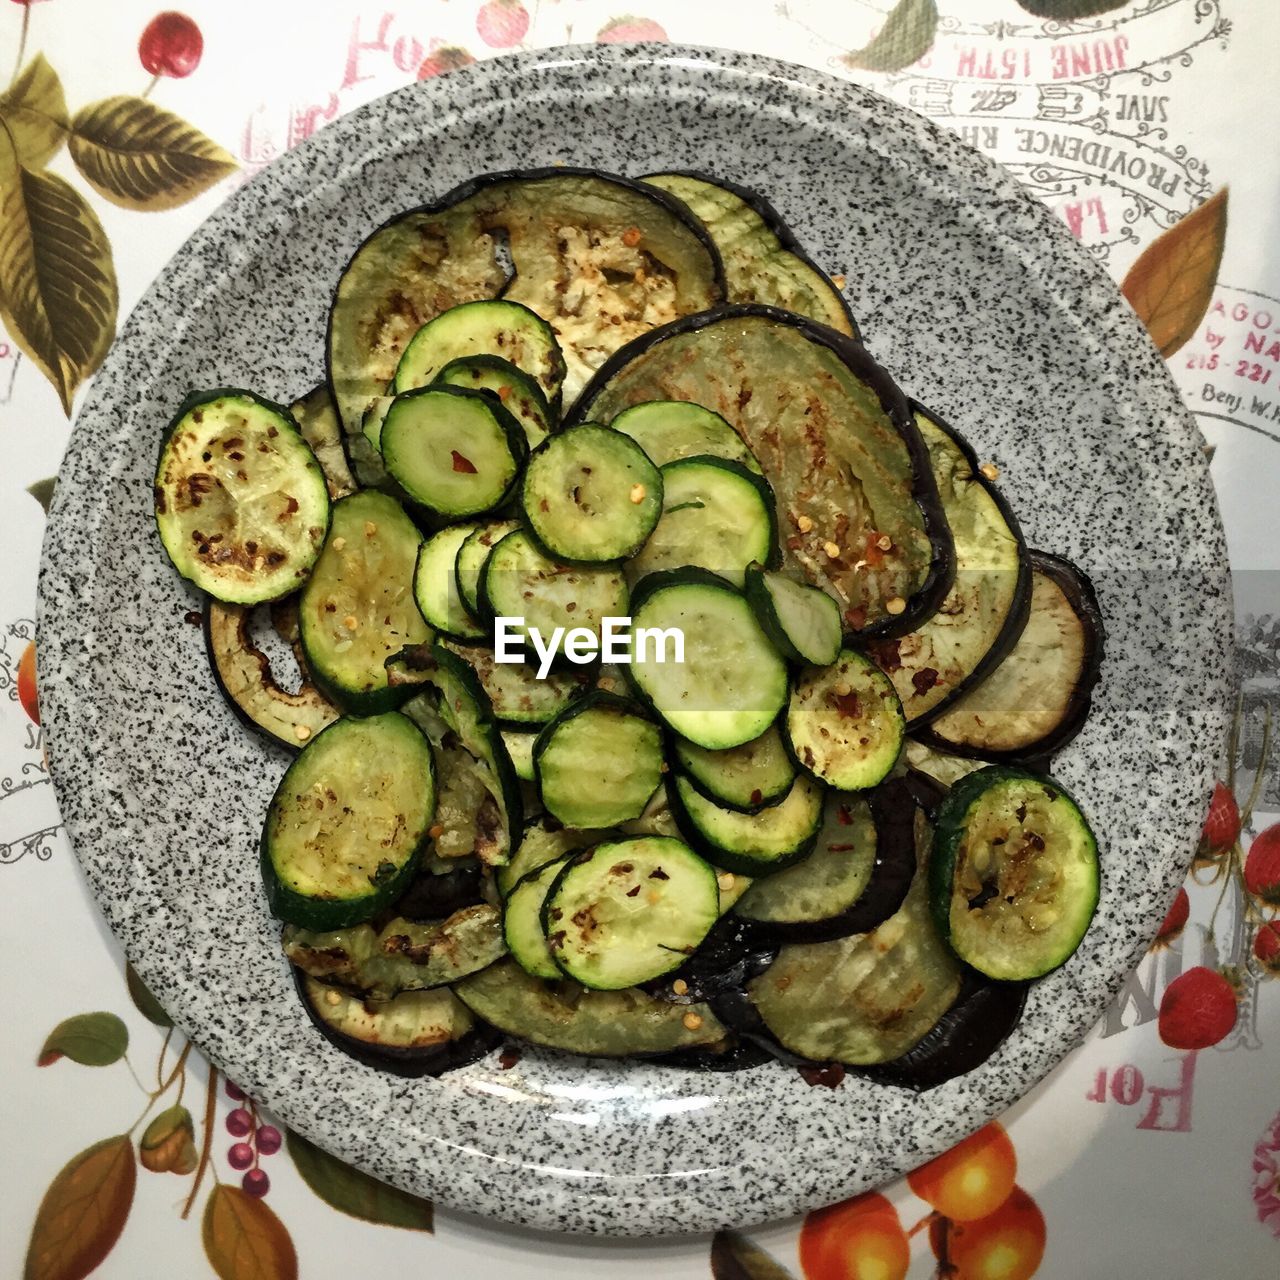 Directly above shot of vegetables in plate